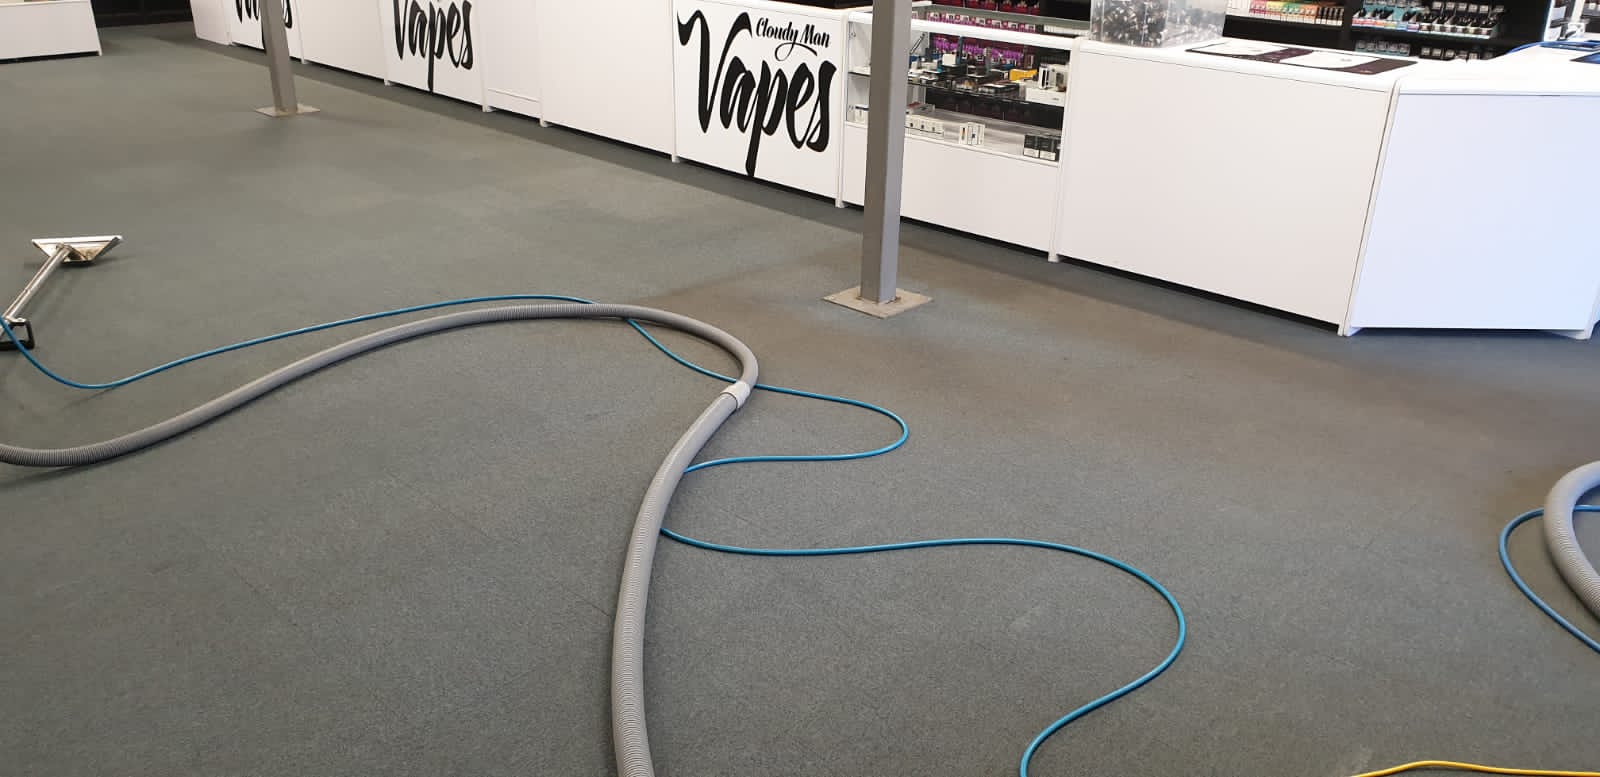 Carpet being cleaned in a shop